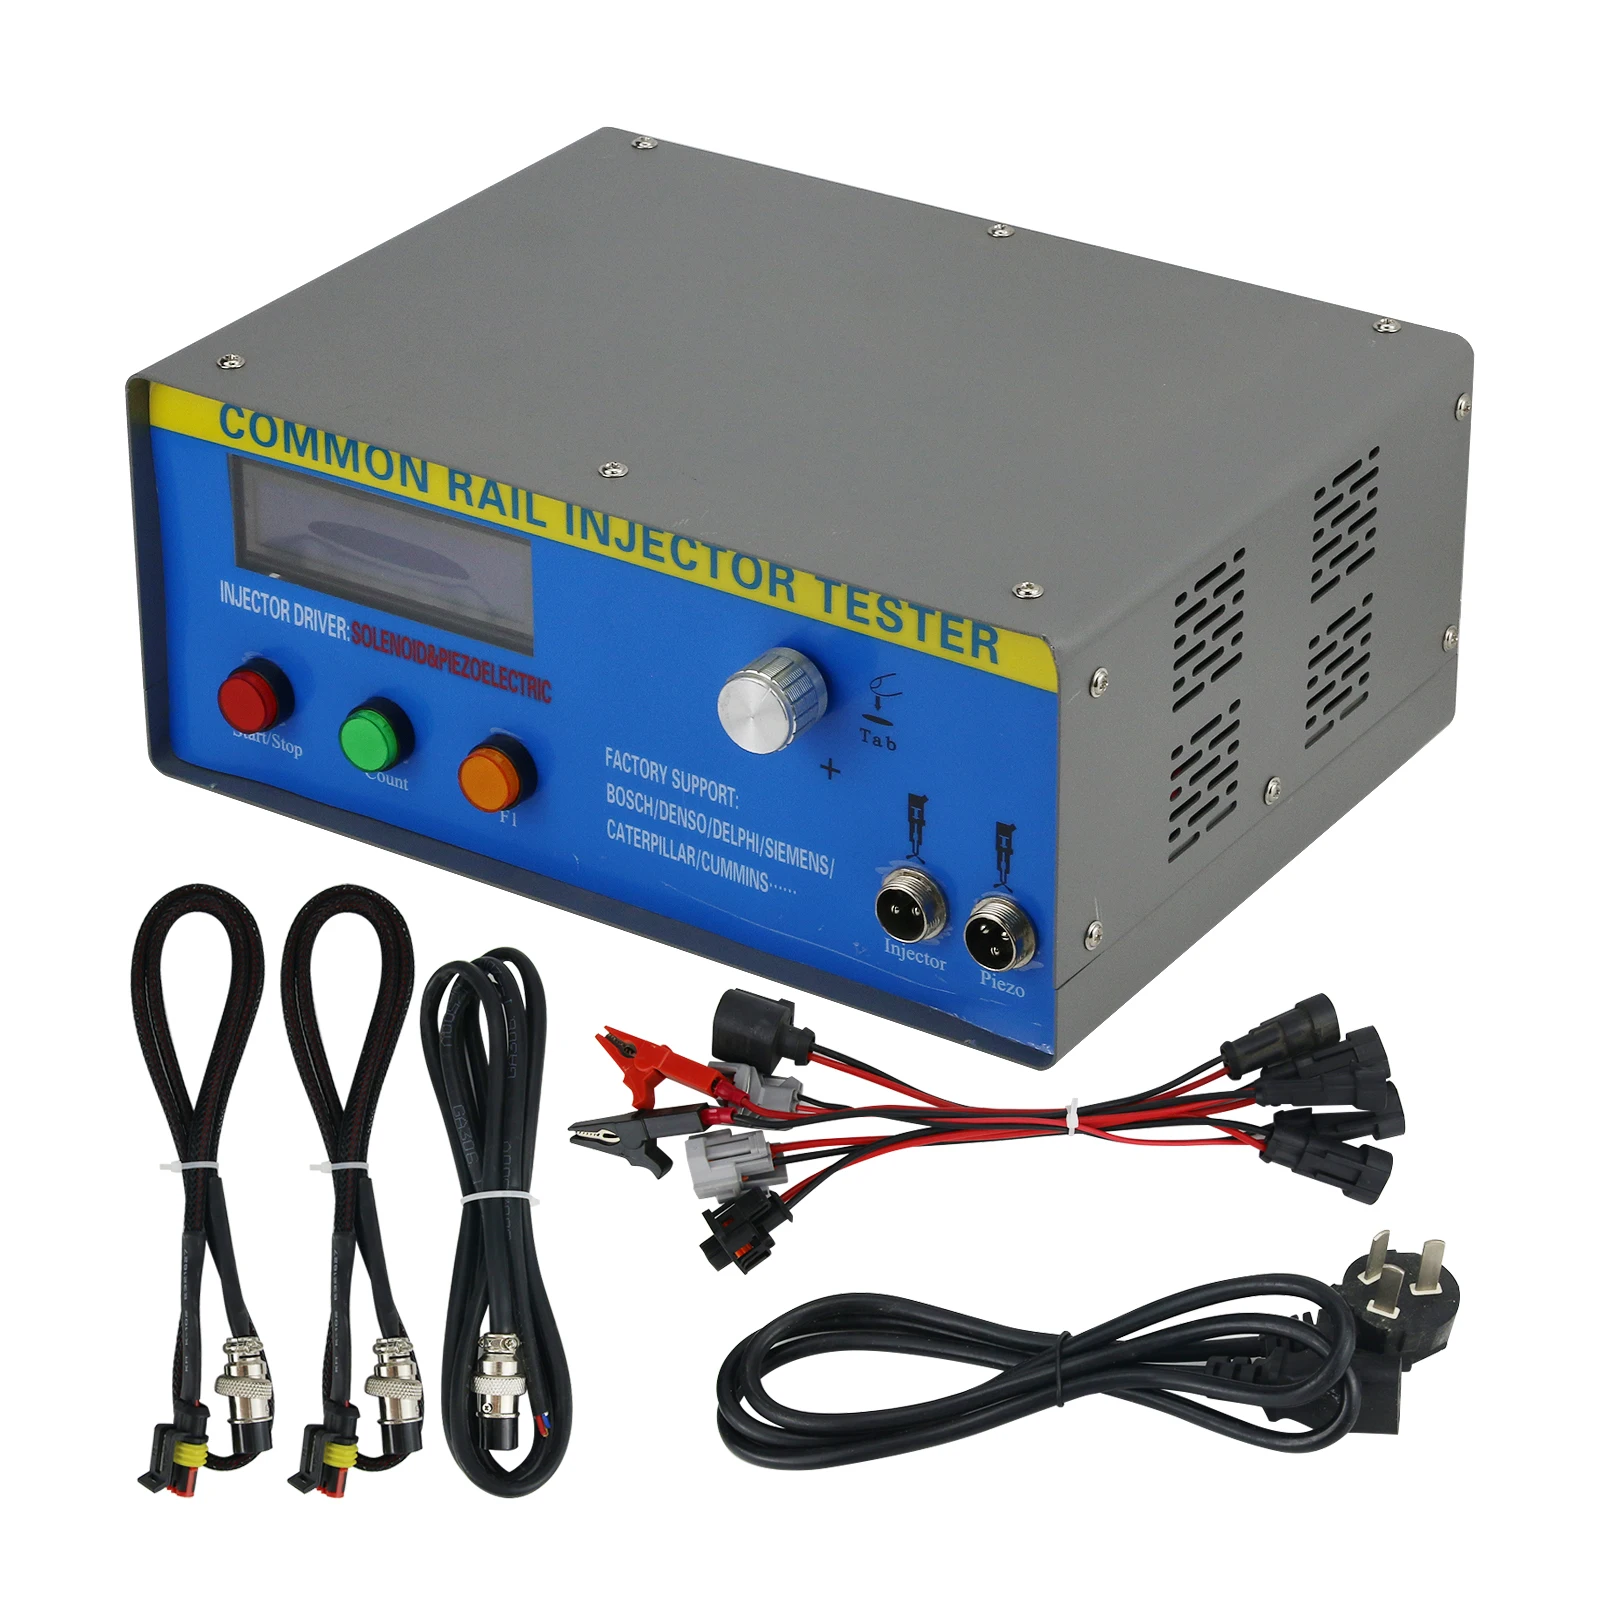 

CR1000 Professional Common Rail Injector Tester For Oil Pump Calibration